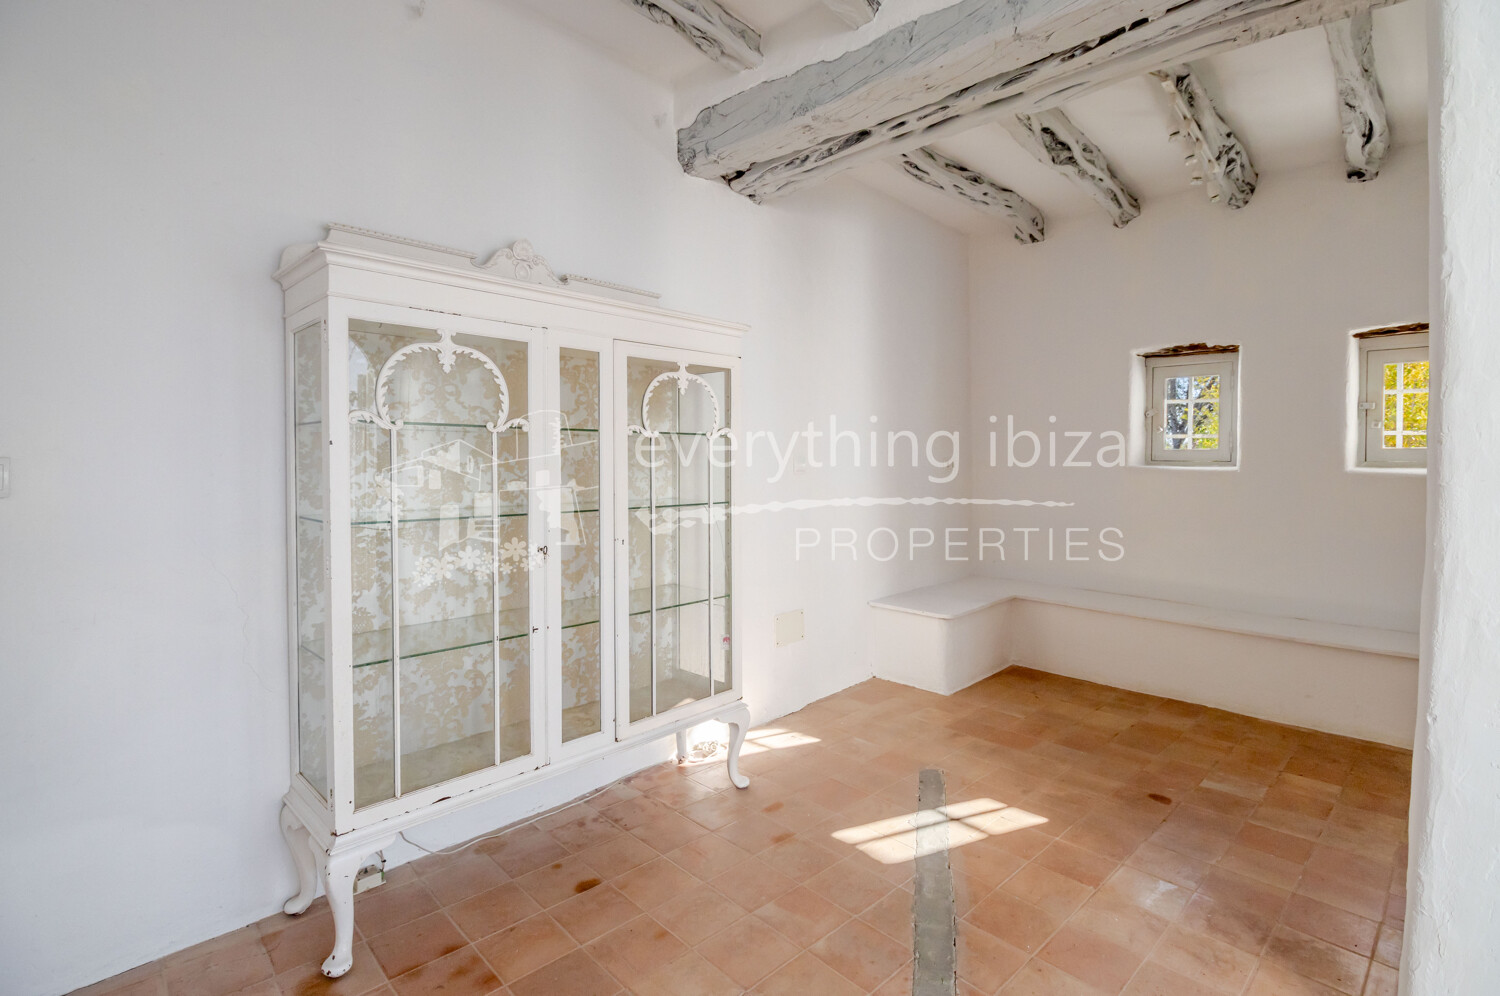 Unique Restored Finca Offering Business and Residential Licenses in Santa Gertrudis, ref. 1665, for sale in Ibiza by everything ibiza Properties